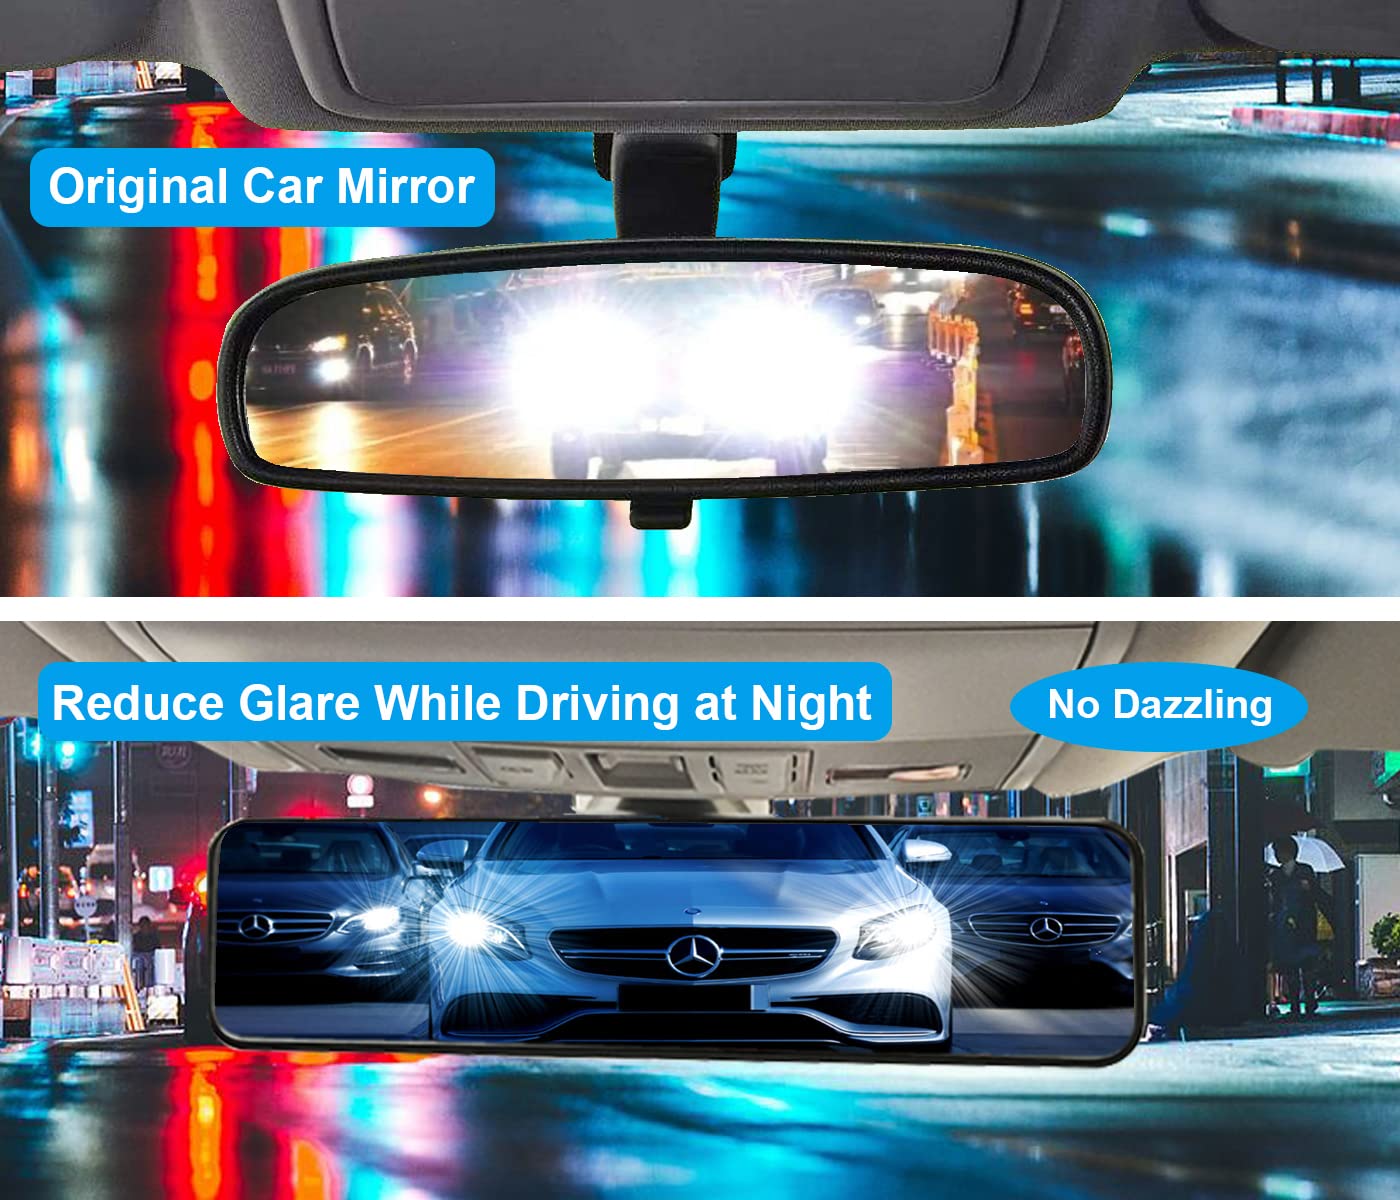 Kitbest Rear View Mirror, Universal Clip On Rearview Mirror, Wide Angle Mirror, Car Mirror, Panoramic Interior Extended Rear View Mirror, Rearview Mirror Extender, Anti Glare, Blue Tint for Car Truck